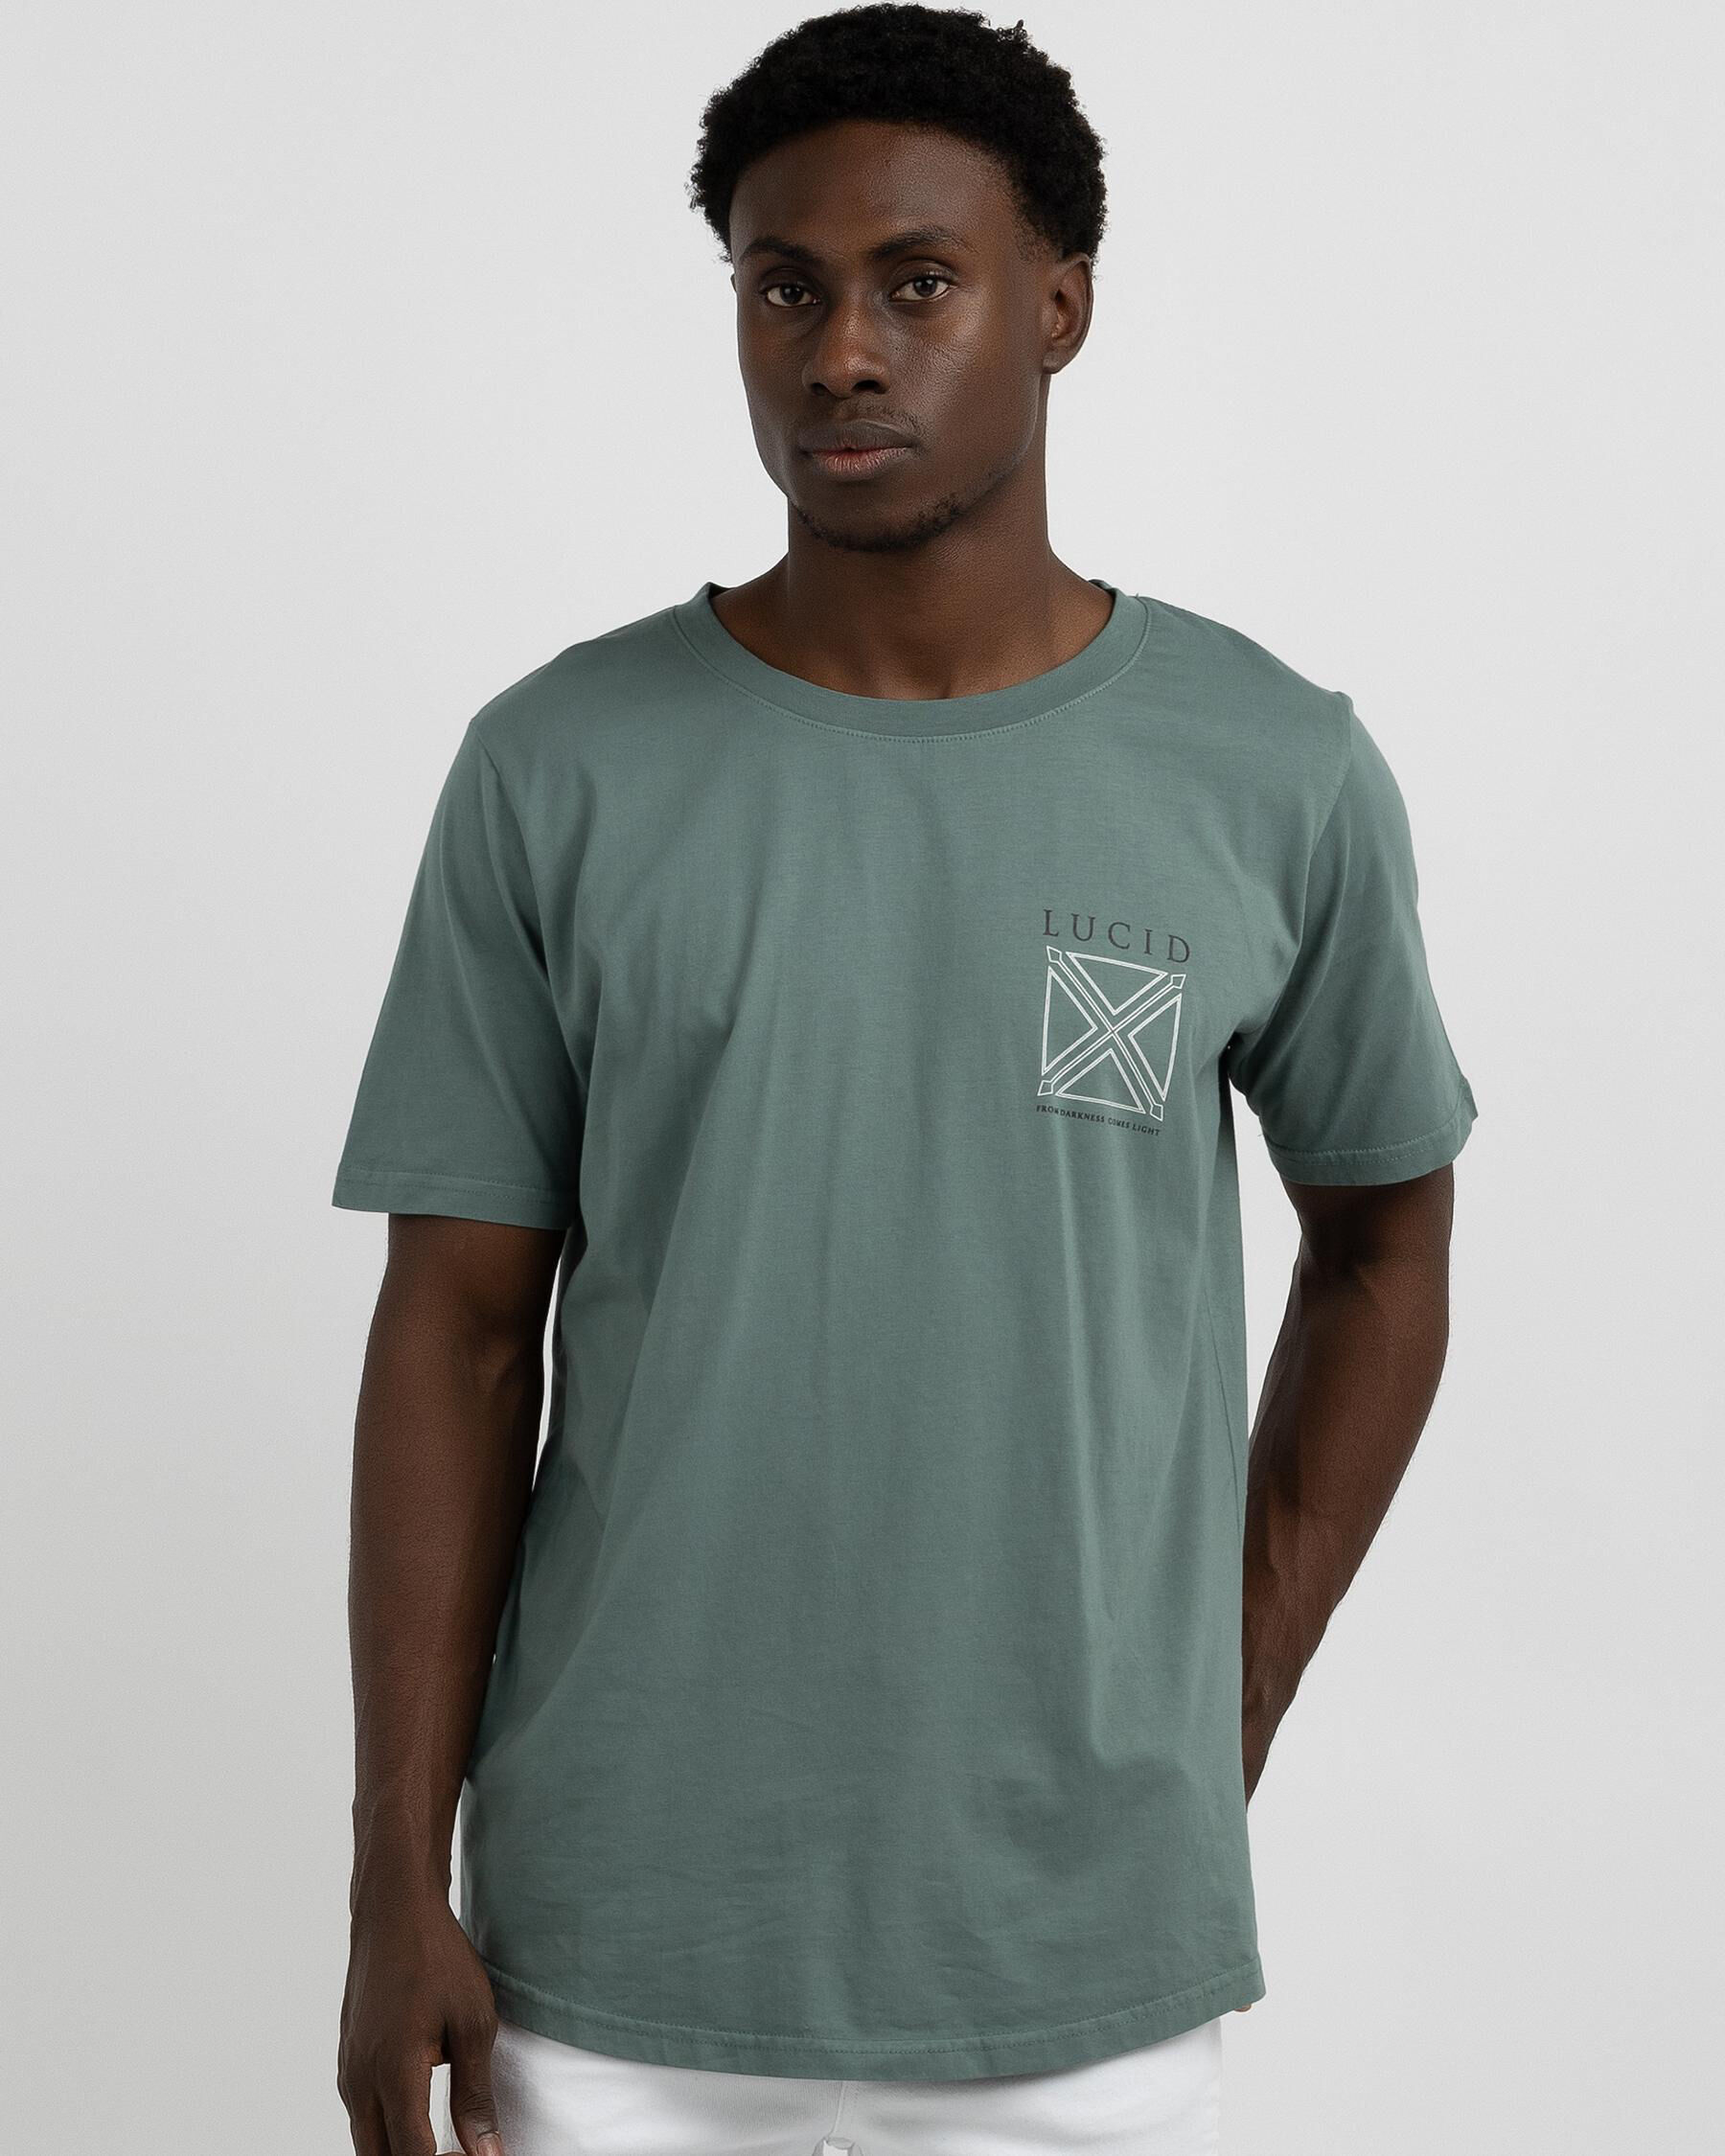 Lucid Intersection T-Shirt In Overdye Green - FREE* Shipping 